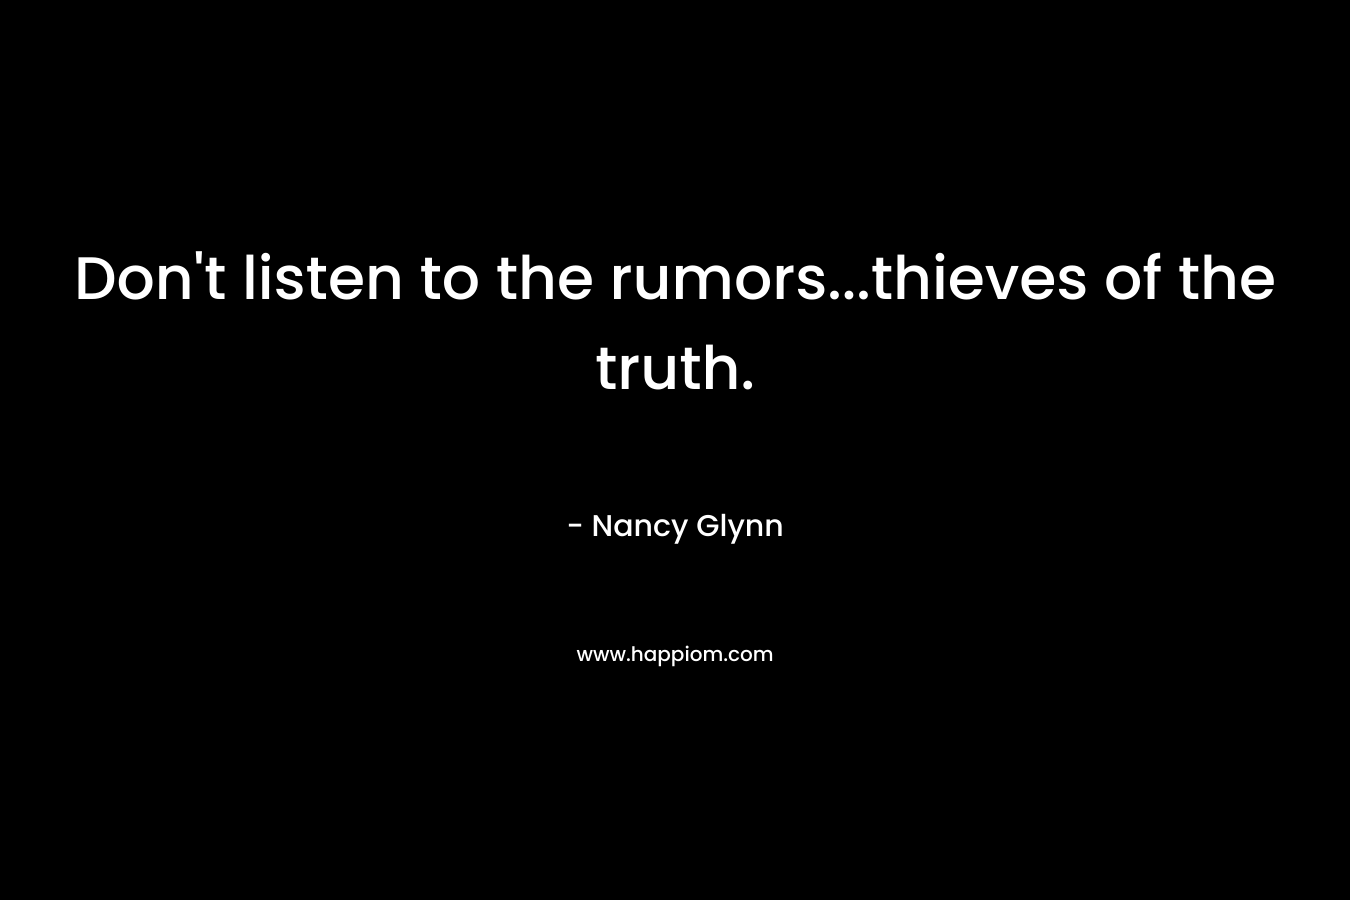 Don't listen to the rumors...thieves of the truth.